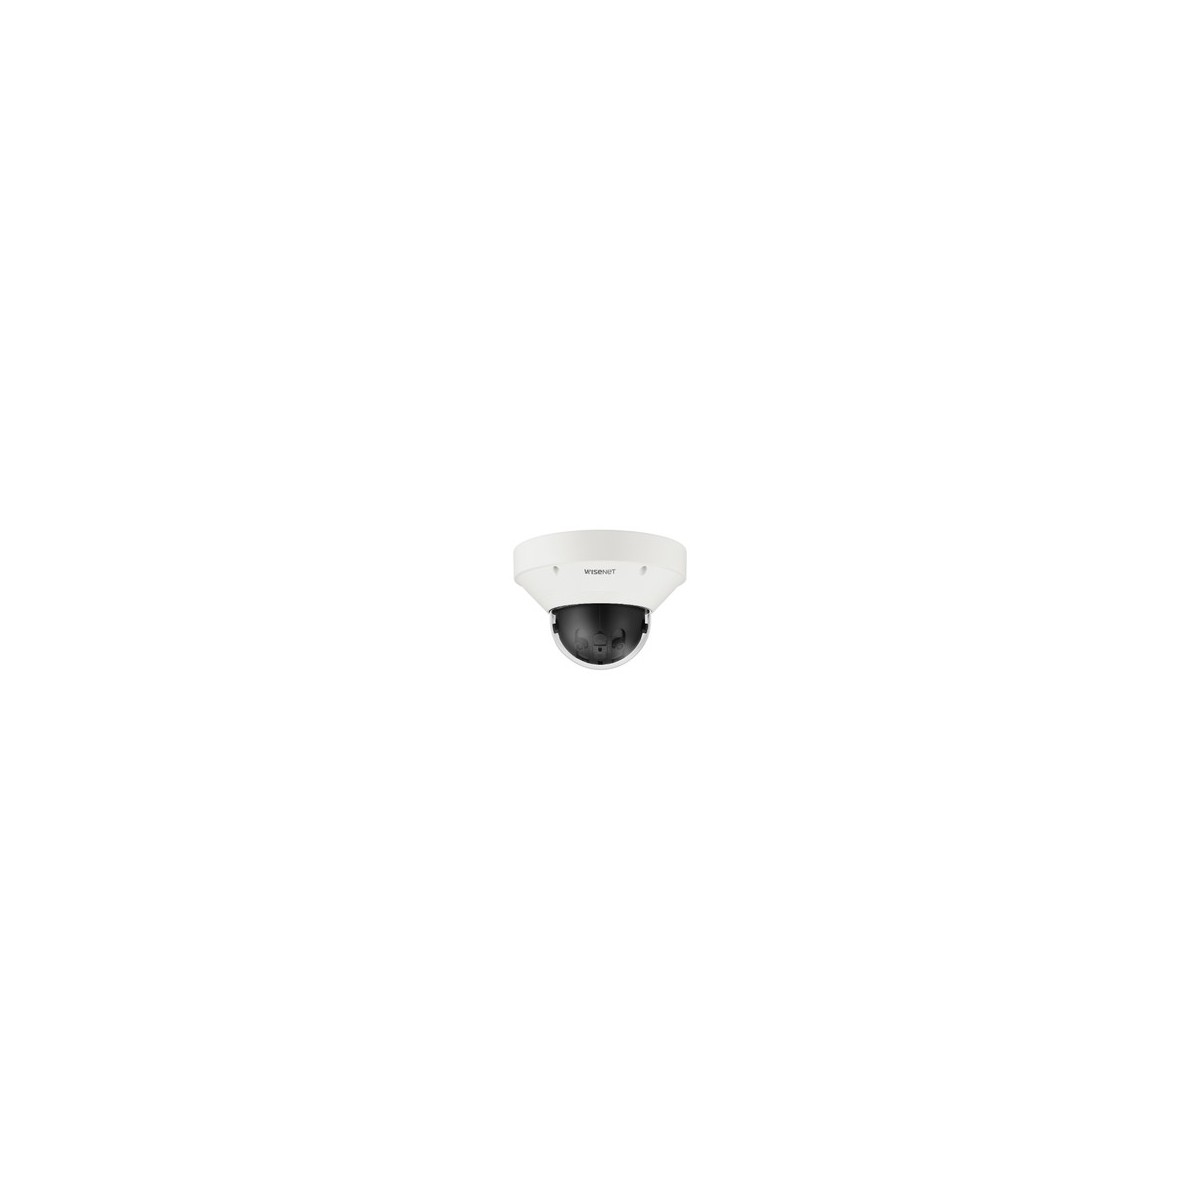 Hanwha Techwin Hanwha PNM-9022V - IP security camera - Indoor  outdoor - Wired - Ceiling - White - Dome